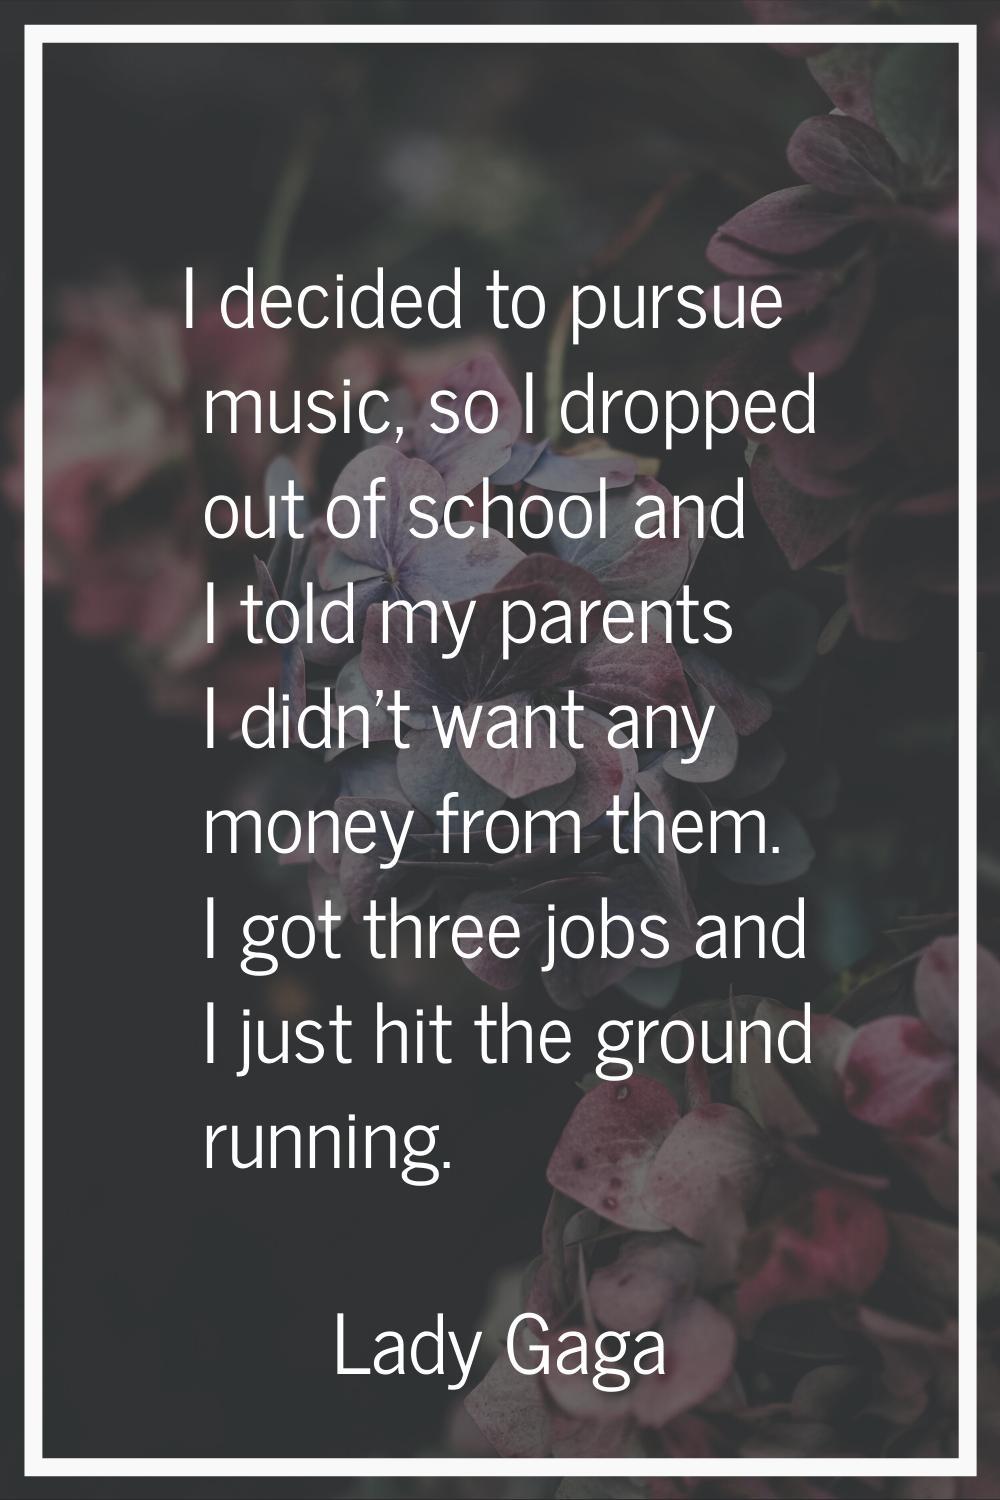 I decided to pursue music, so I dropped out of school and I told my parents I didn't want any money